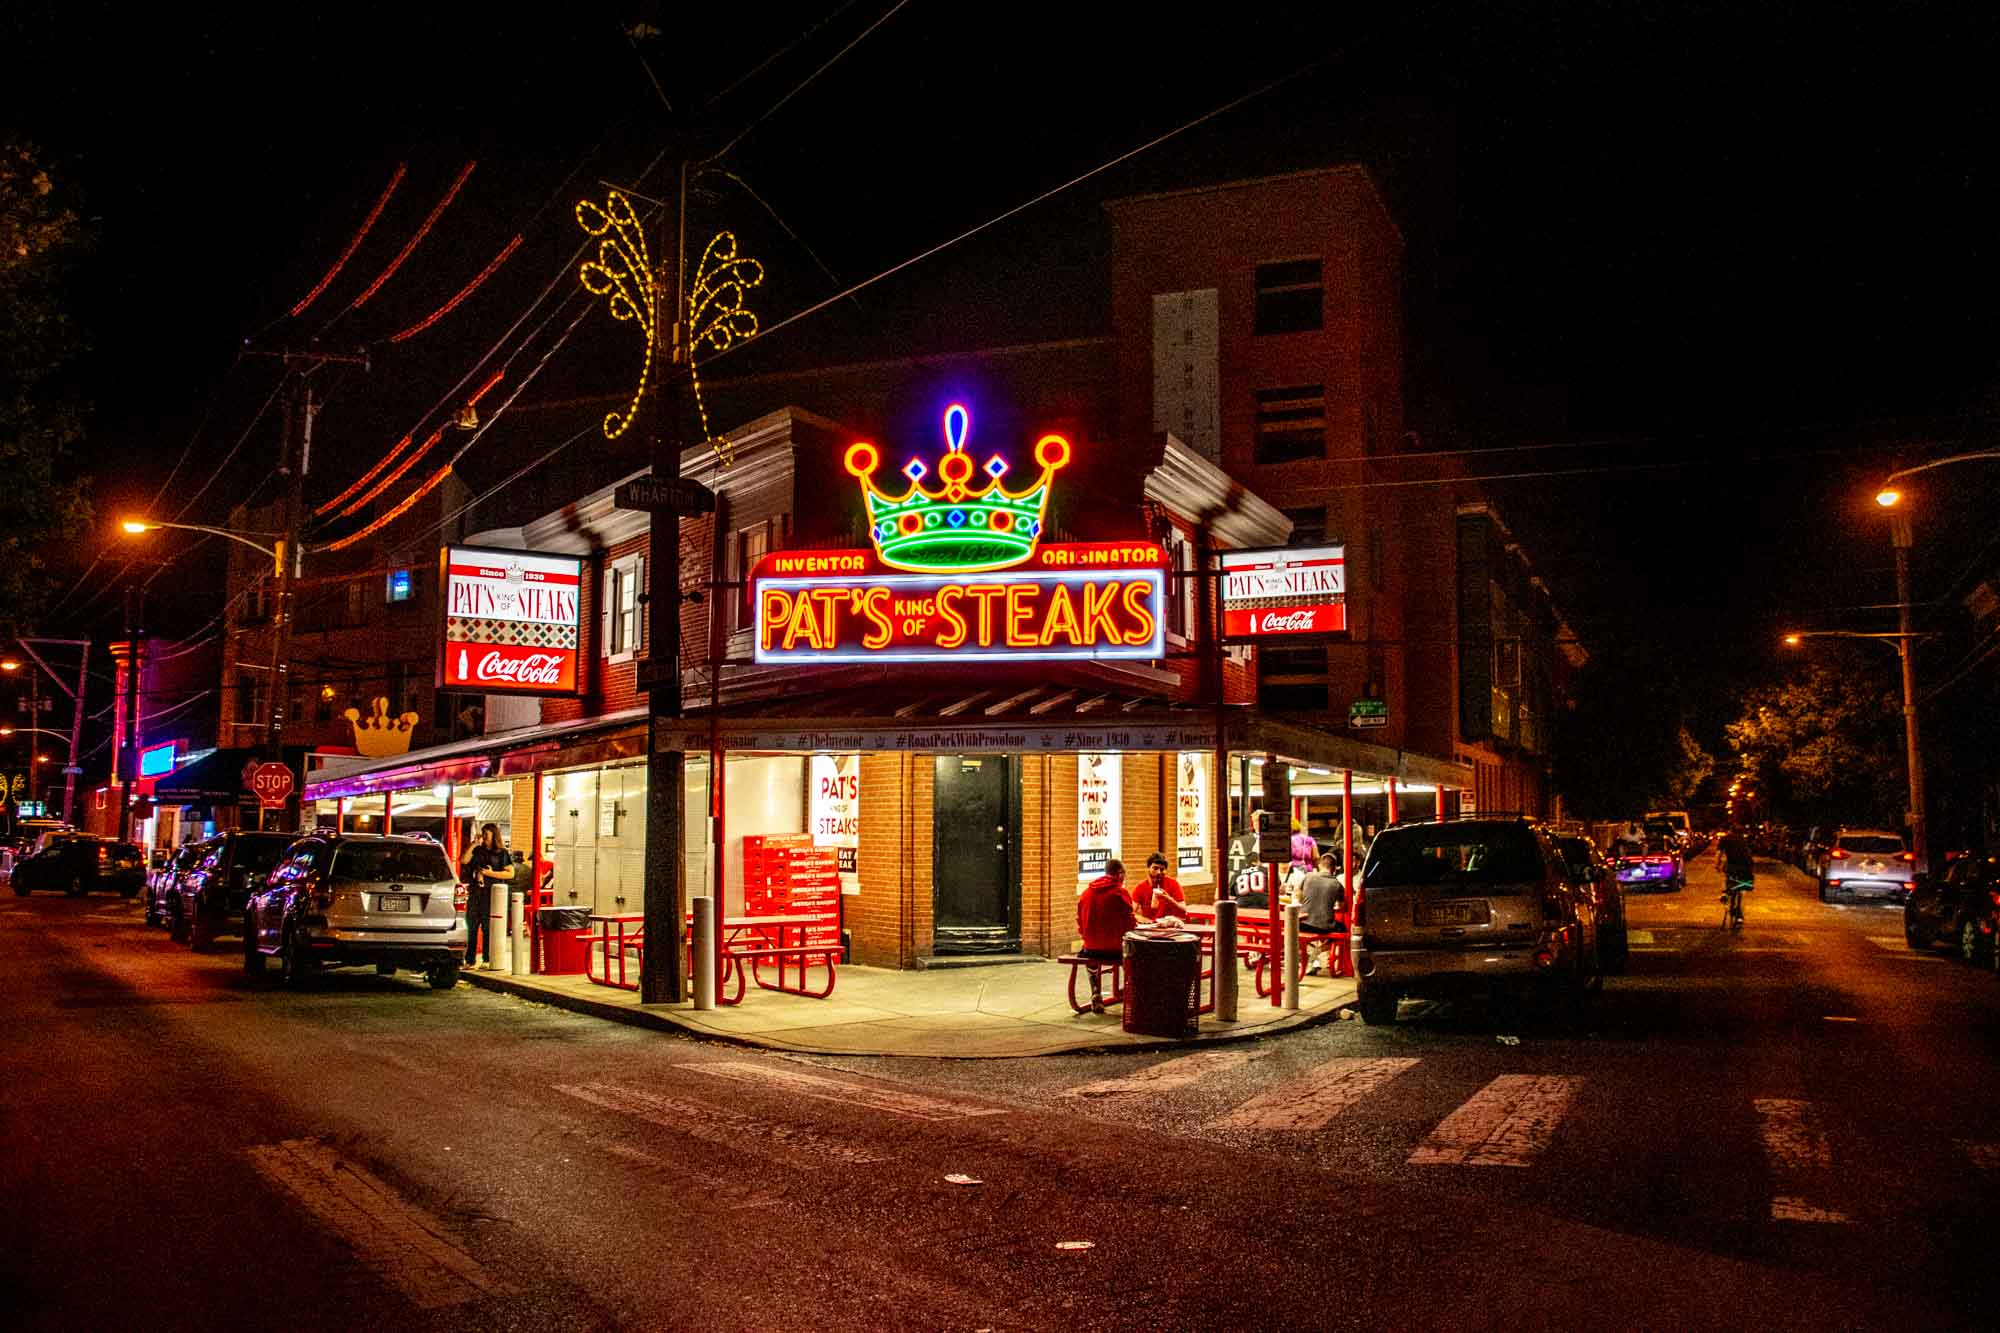 Exterior neon sign saying Pat's King of Steaks